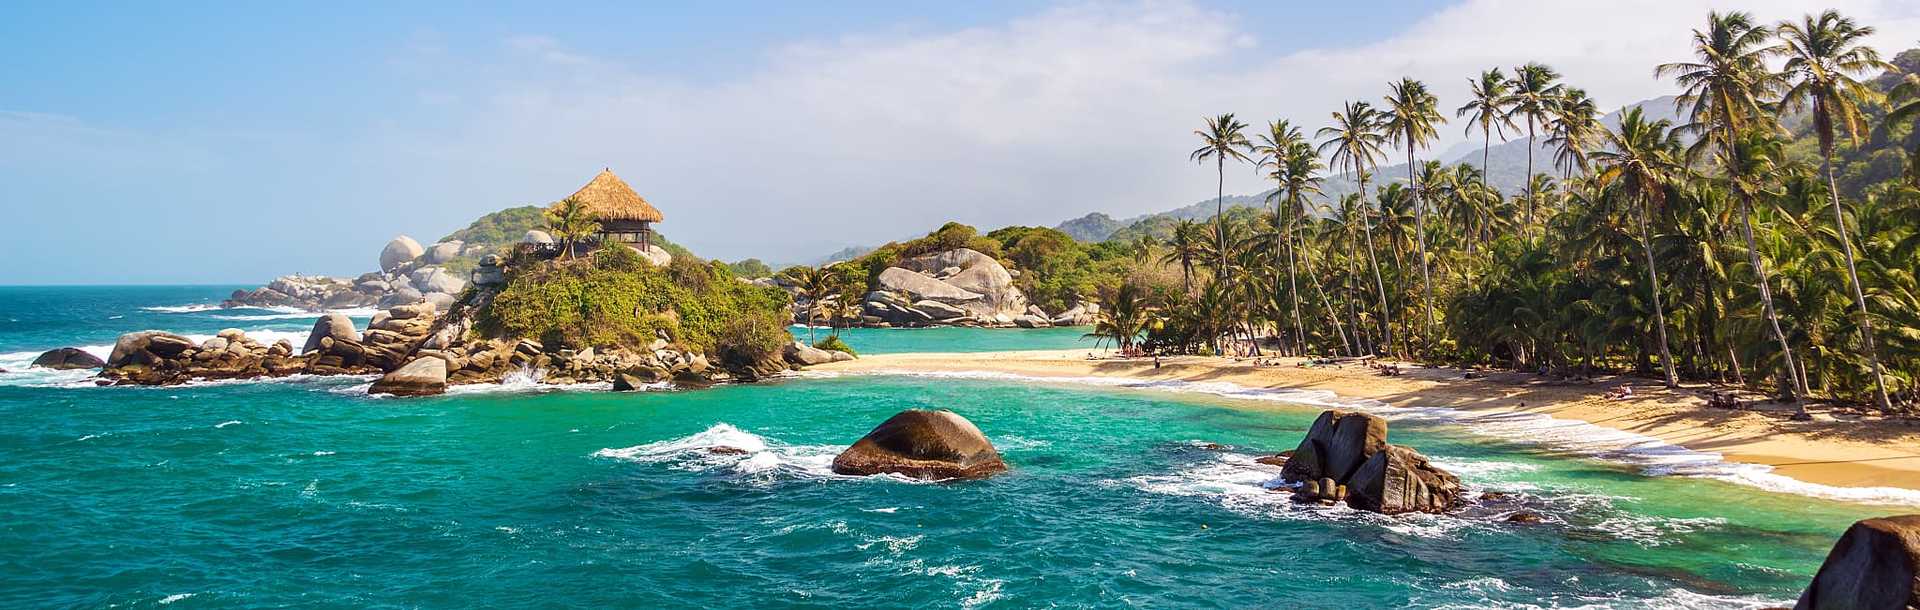 Tayrona National Park, in northern Colombia.